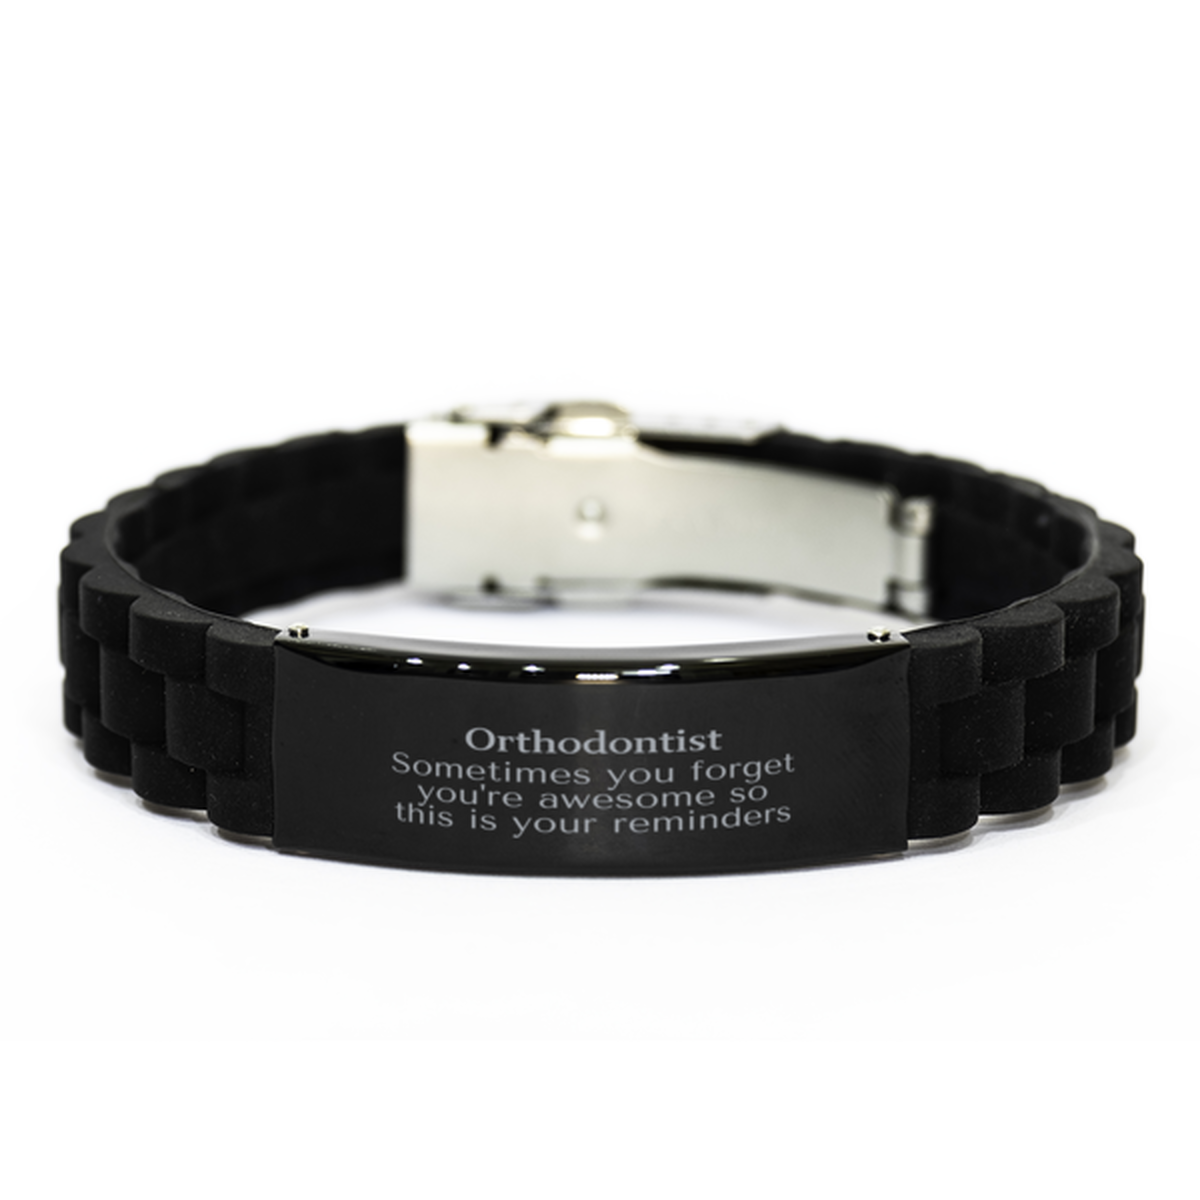 Sentimental Orthodontist Black Glidelock Clasp Bracelet, Orthodontist Sometimes you forget you're awesome so this is your reminders, Graduation Christmas Birthday Gifts for Orthodontist, Men, Women, Coworkers